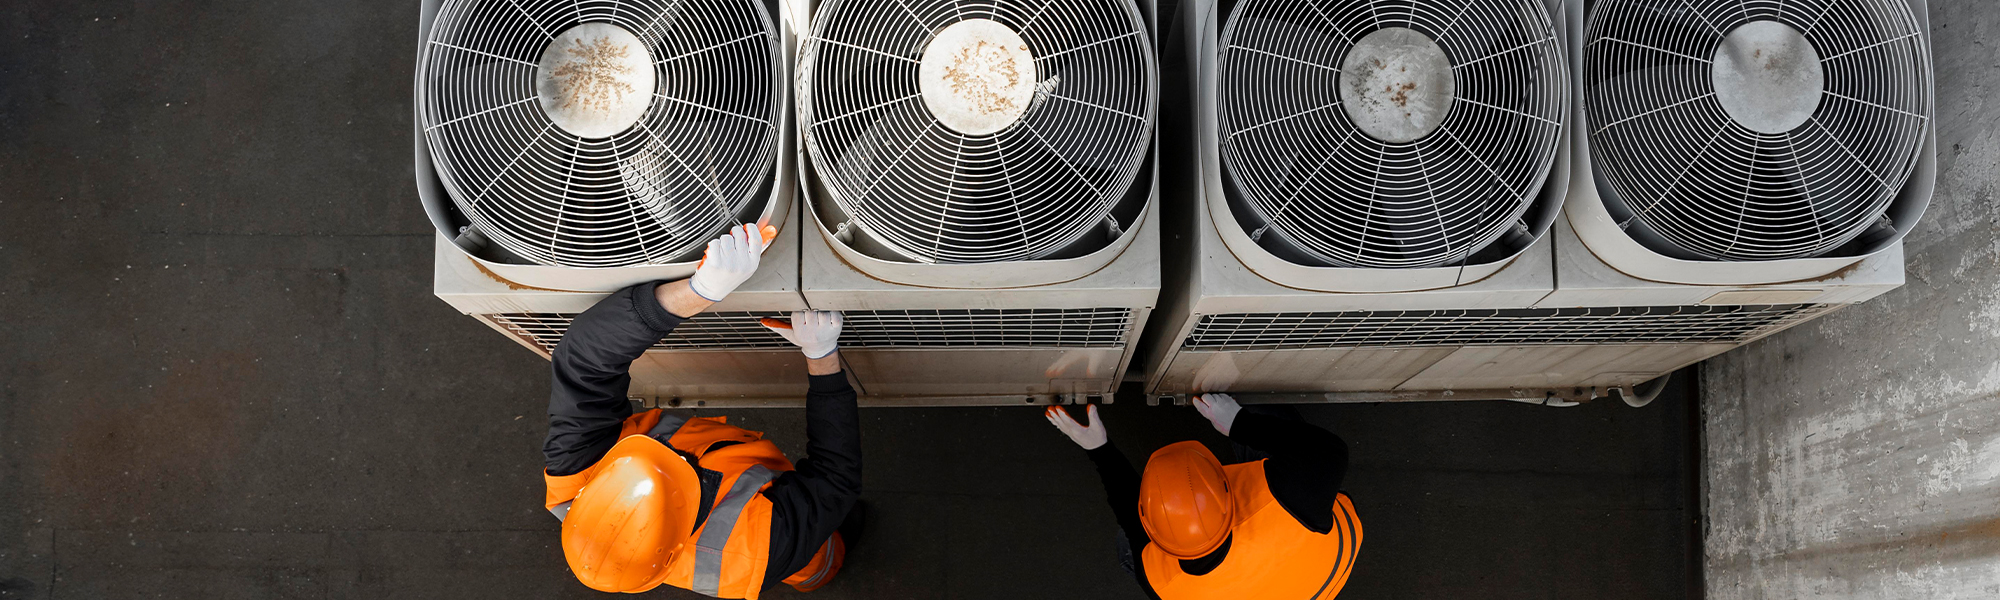 ROLE OF HVAC SYSTEMS IN WAREHOUSES